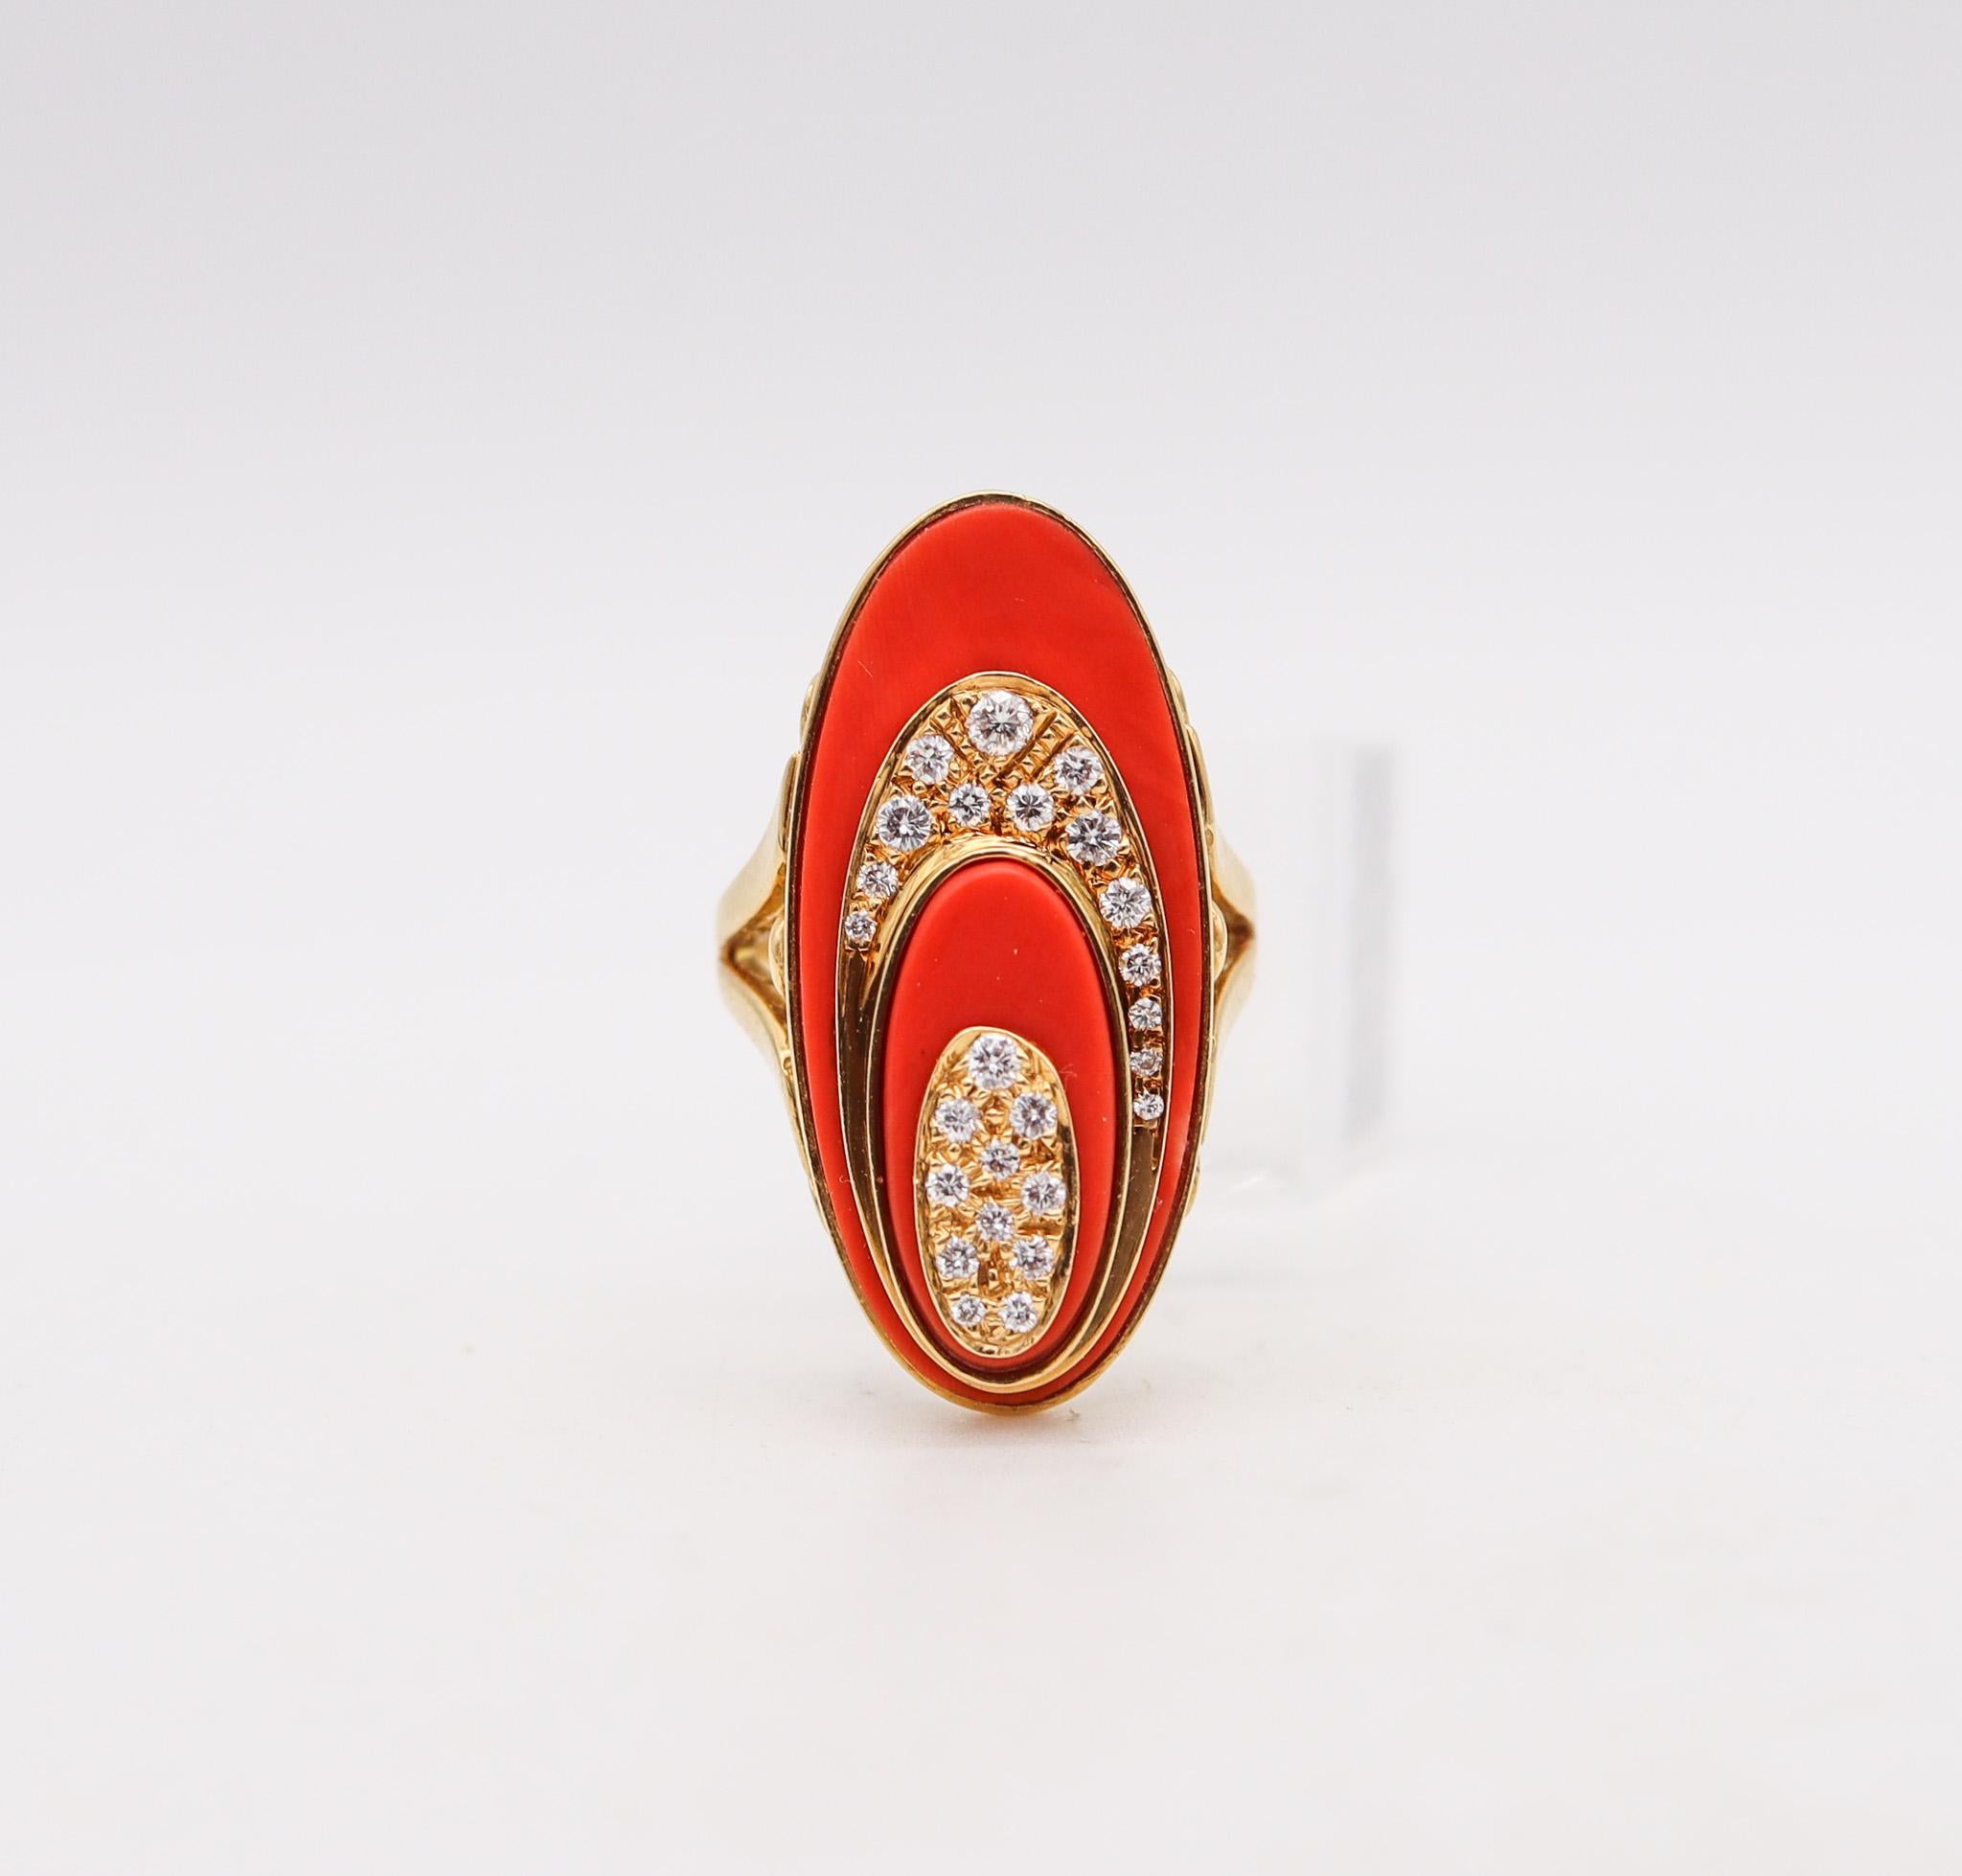 Modernist Retro Modern 1970 Sculptural Geometric Ring In 18Kt Gold With Diamonds And Coral